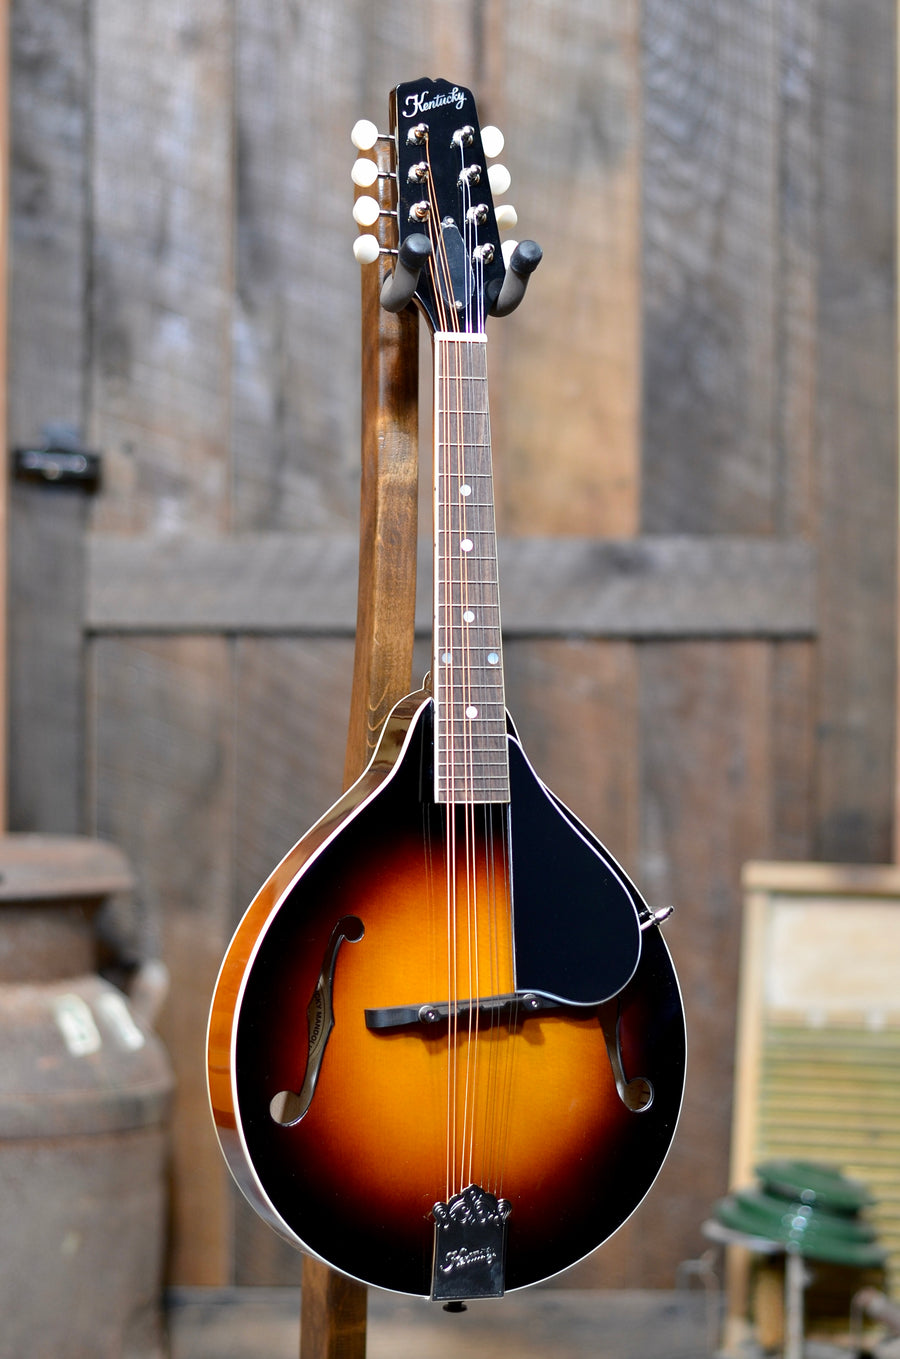 Kentucky KM-150 A-Style Mandolin With Case